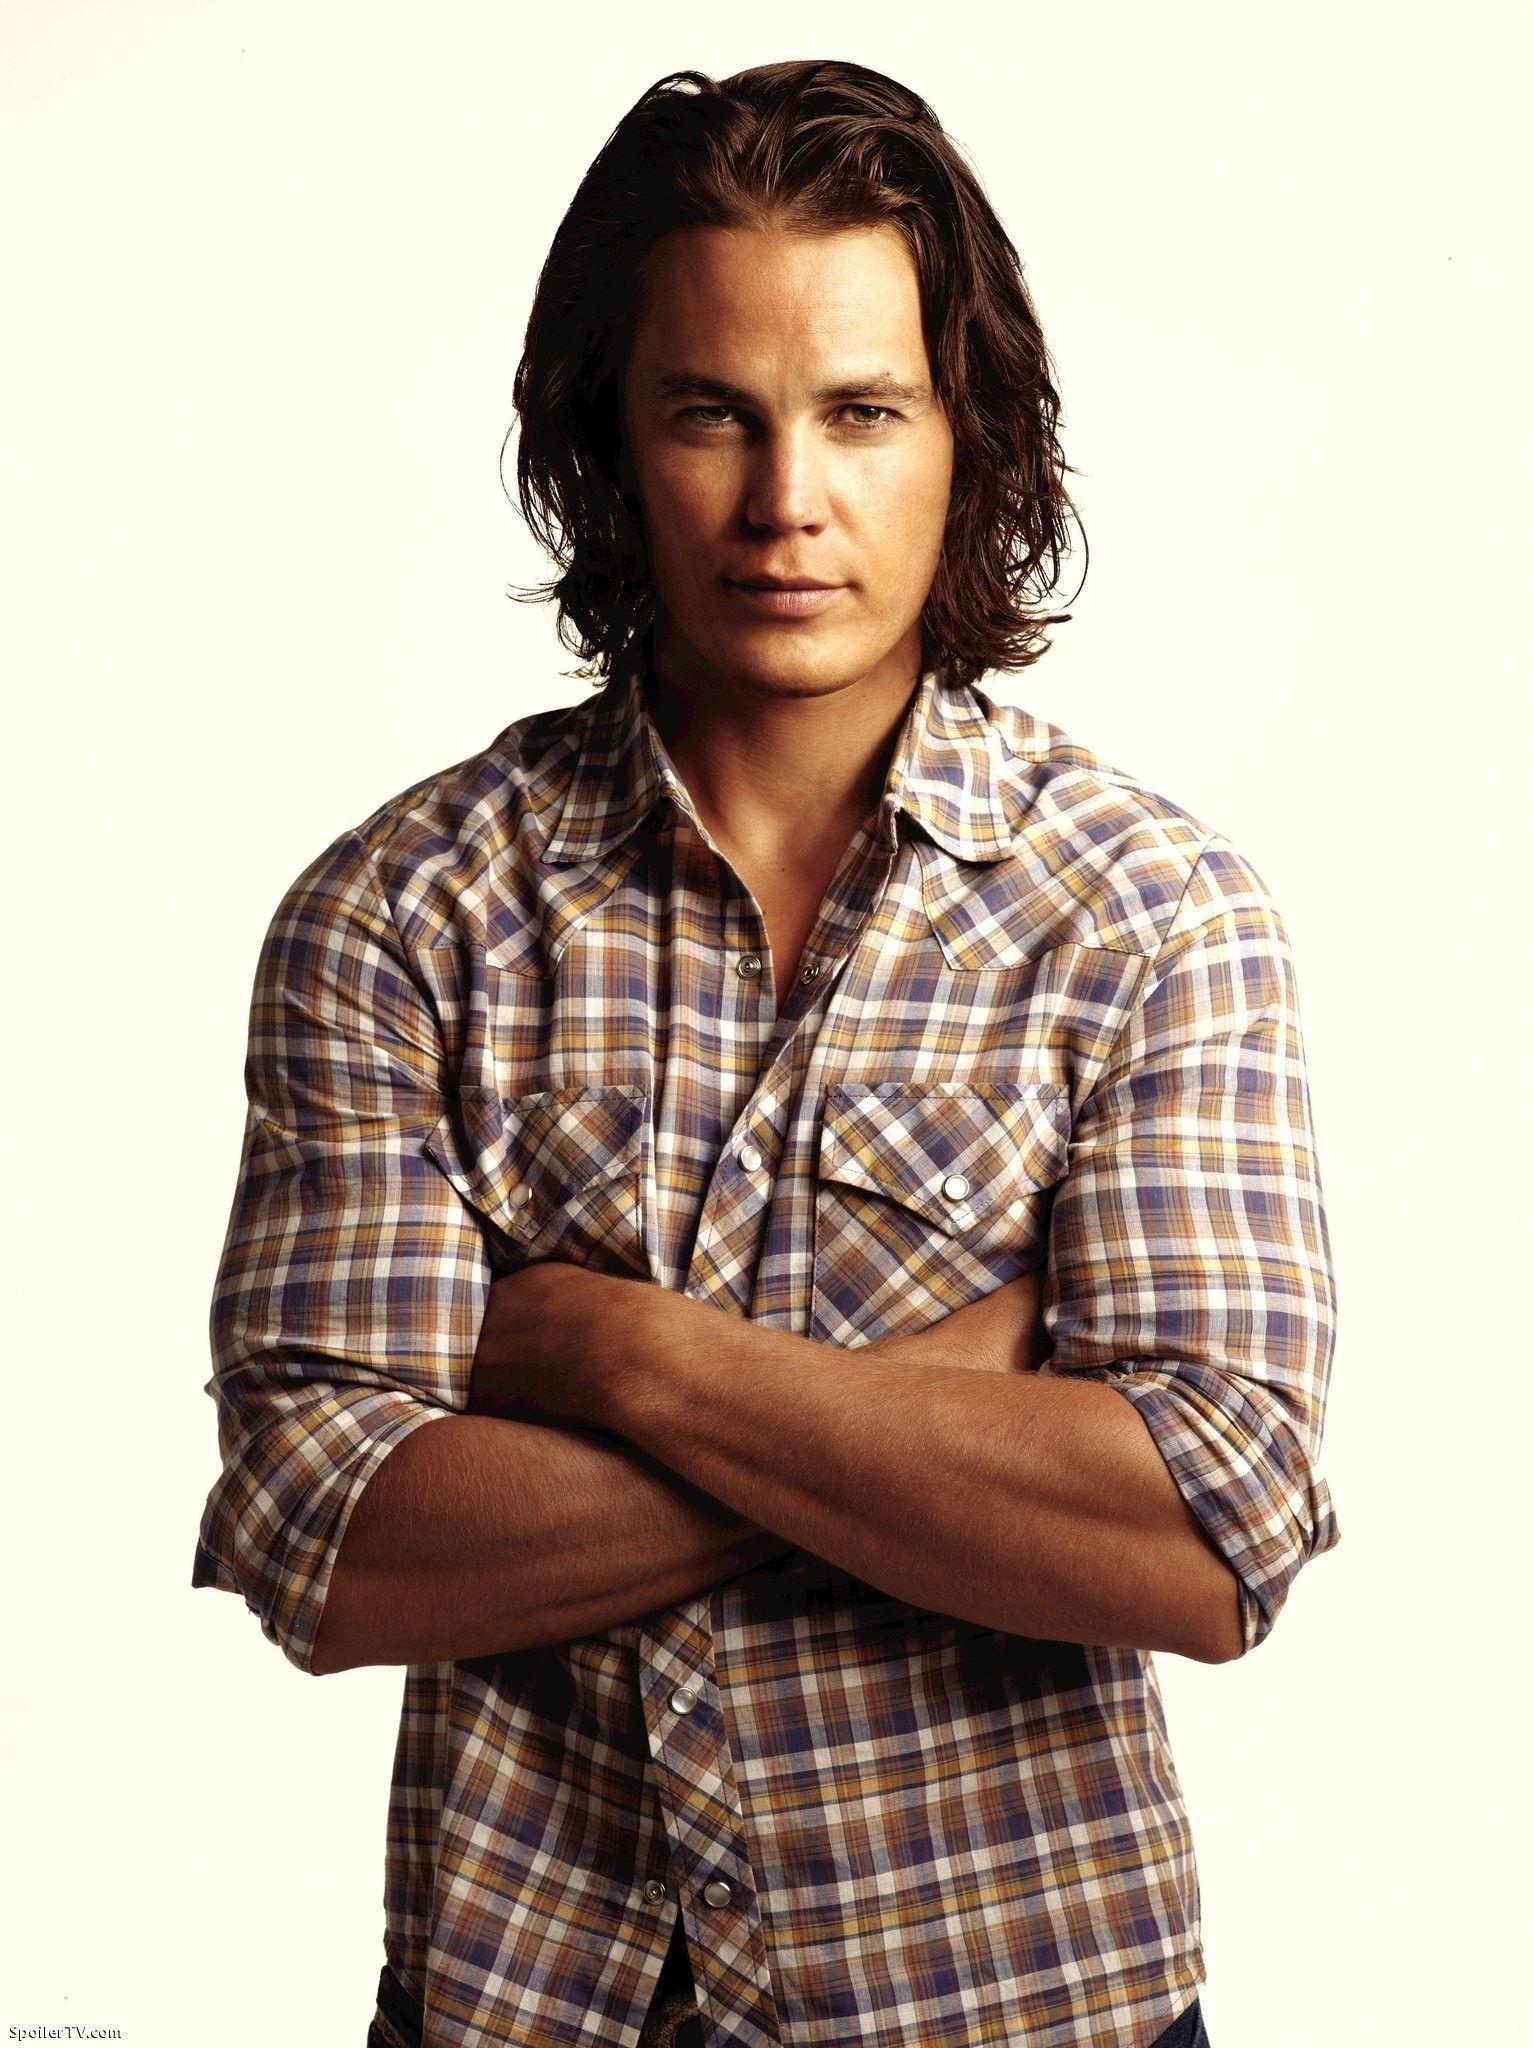 Awesome Taylor Kitsch Image 11. hdwallpaper